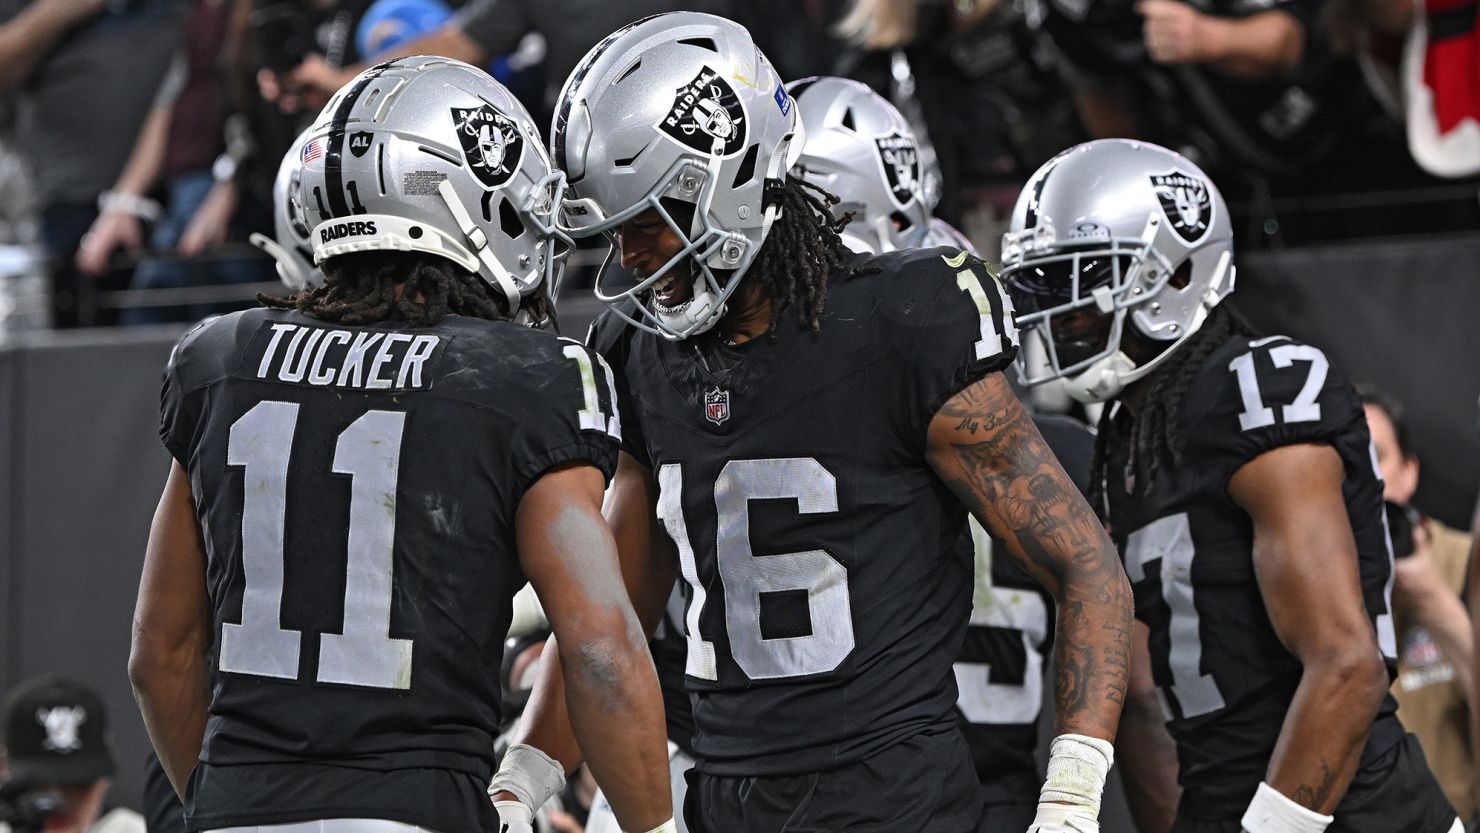 NFL News: Las Vegas Raiders Stun by Deciding 13th Draft Pick with a Coin Toss Featuring Brock Bowers and Terrion Arnold